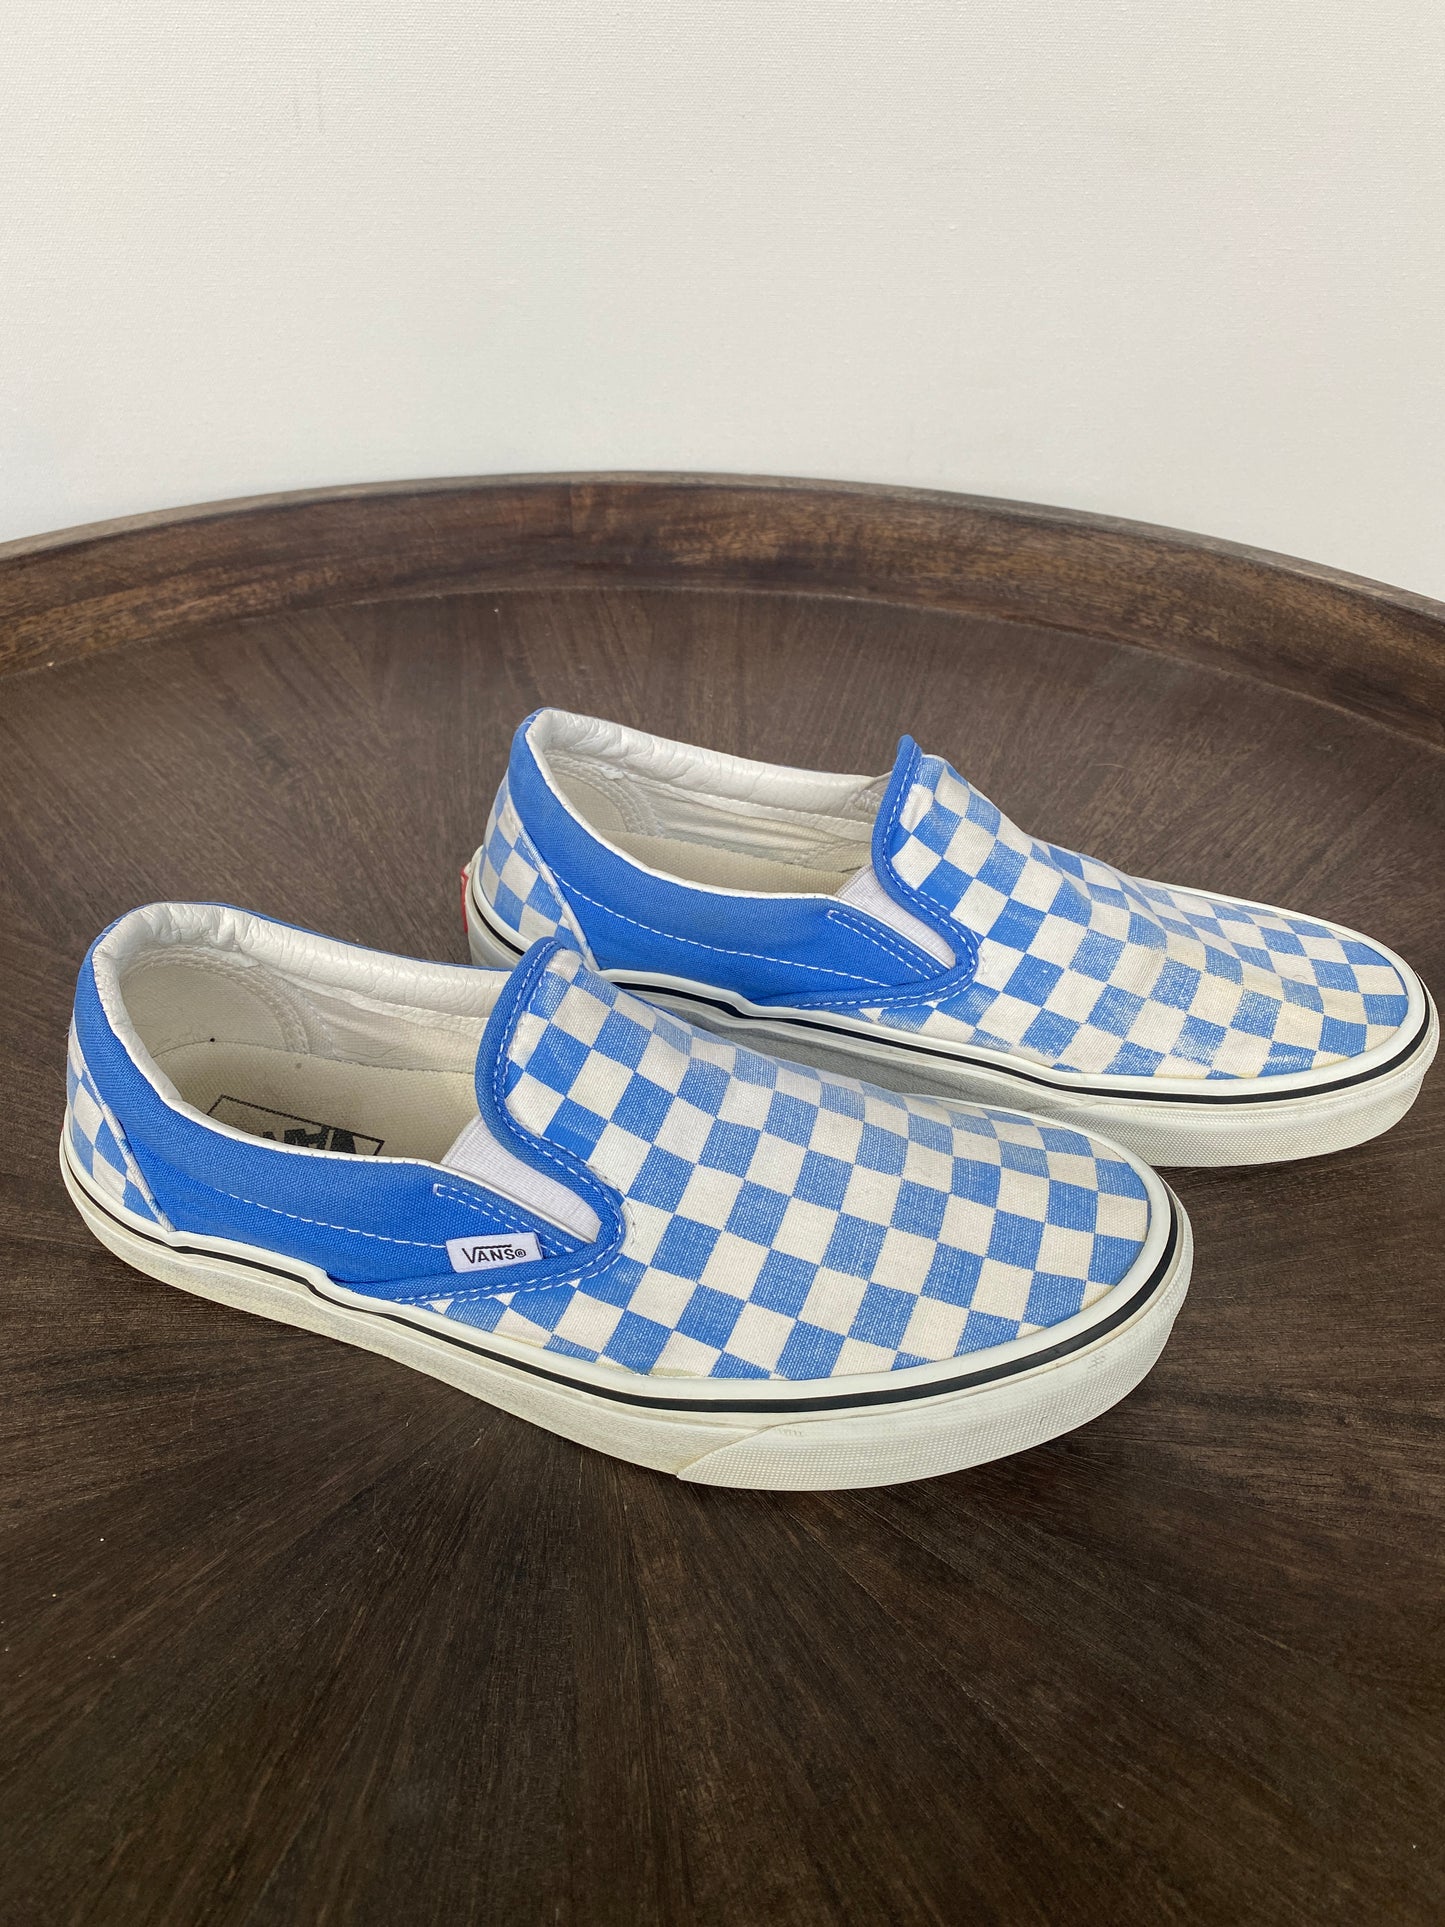 Vans Blue and White Checkered Sneakers (9.5)